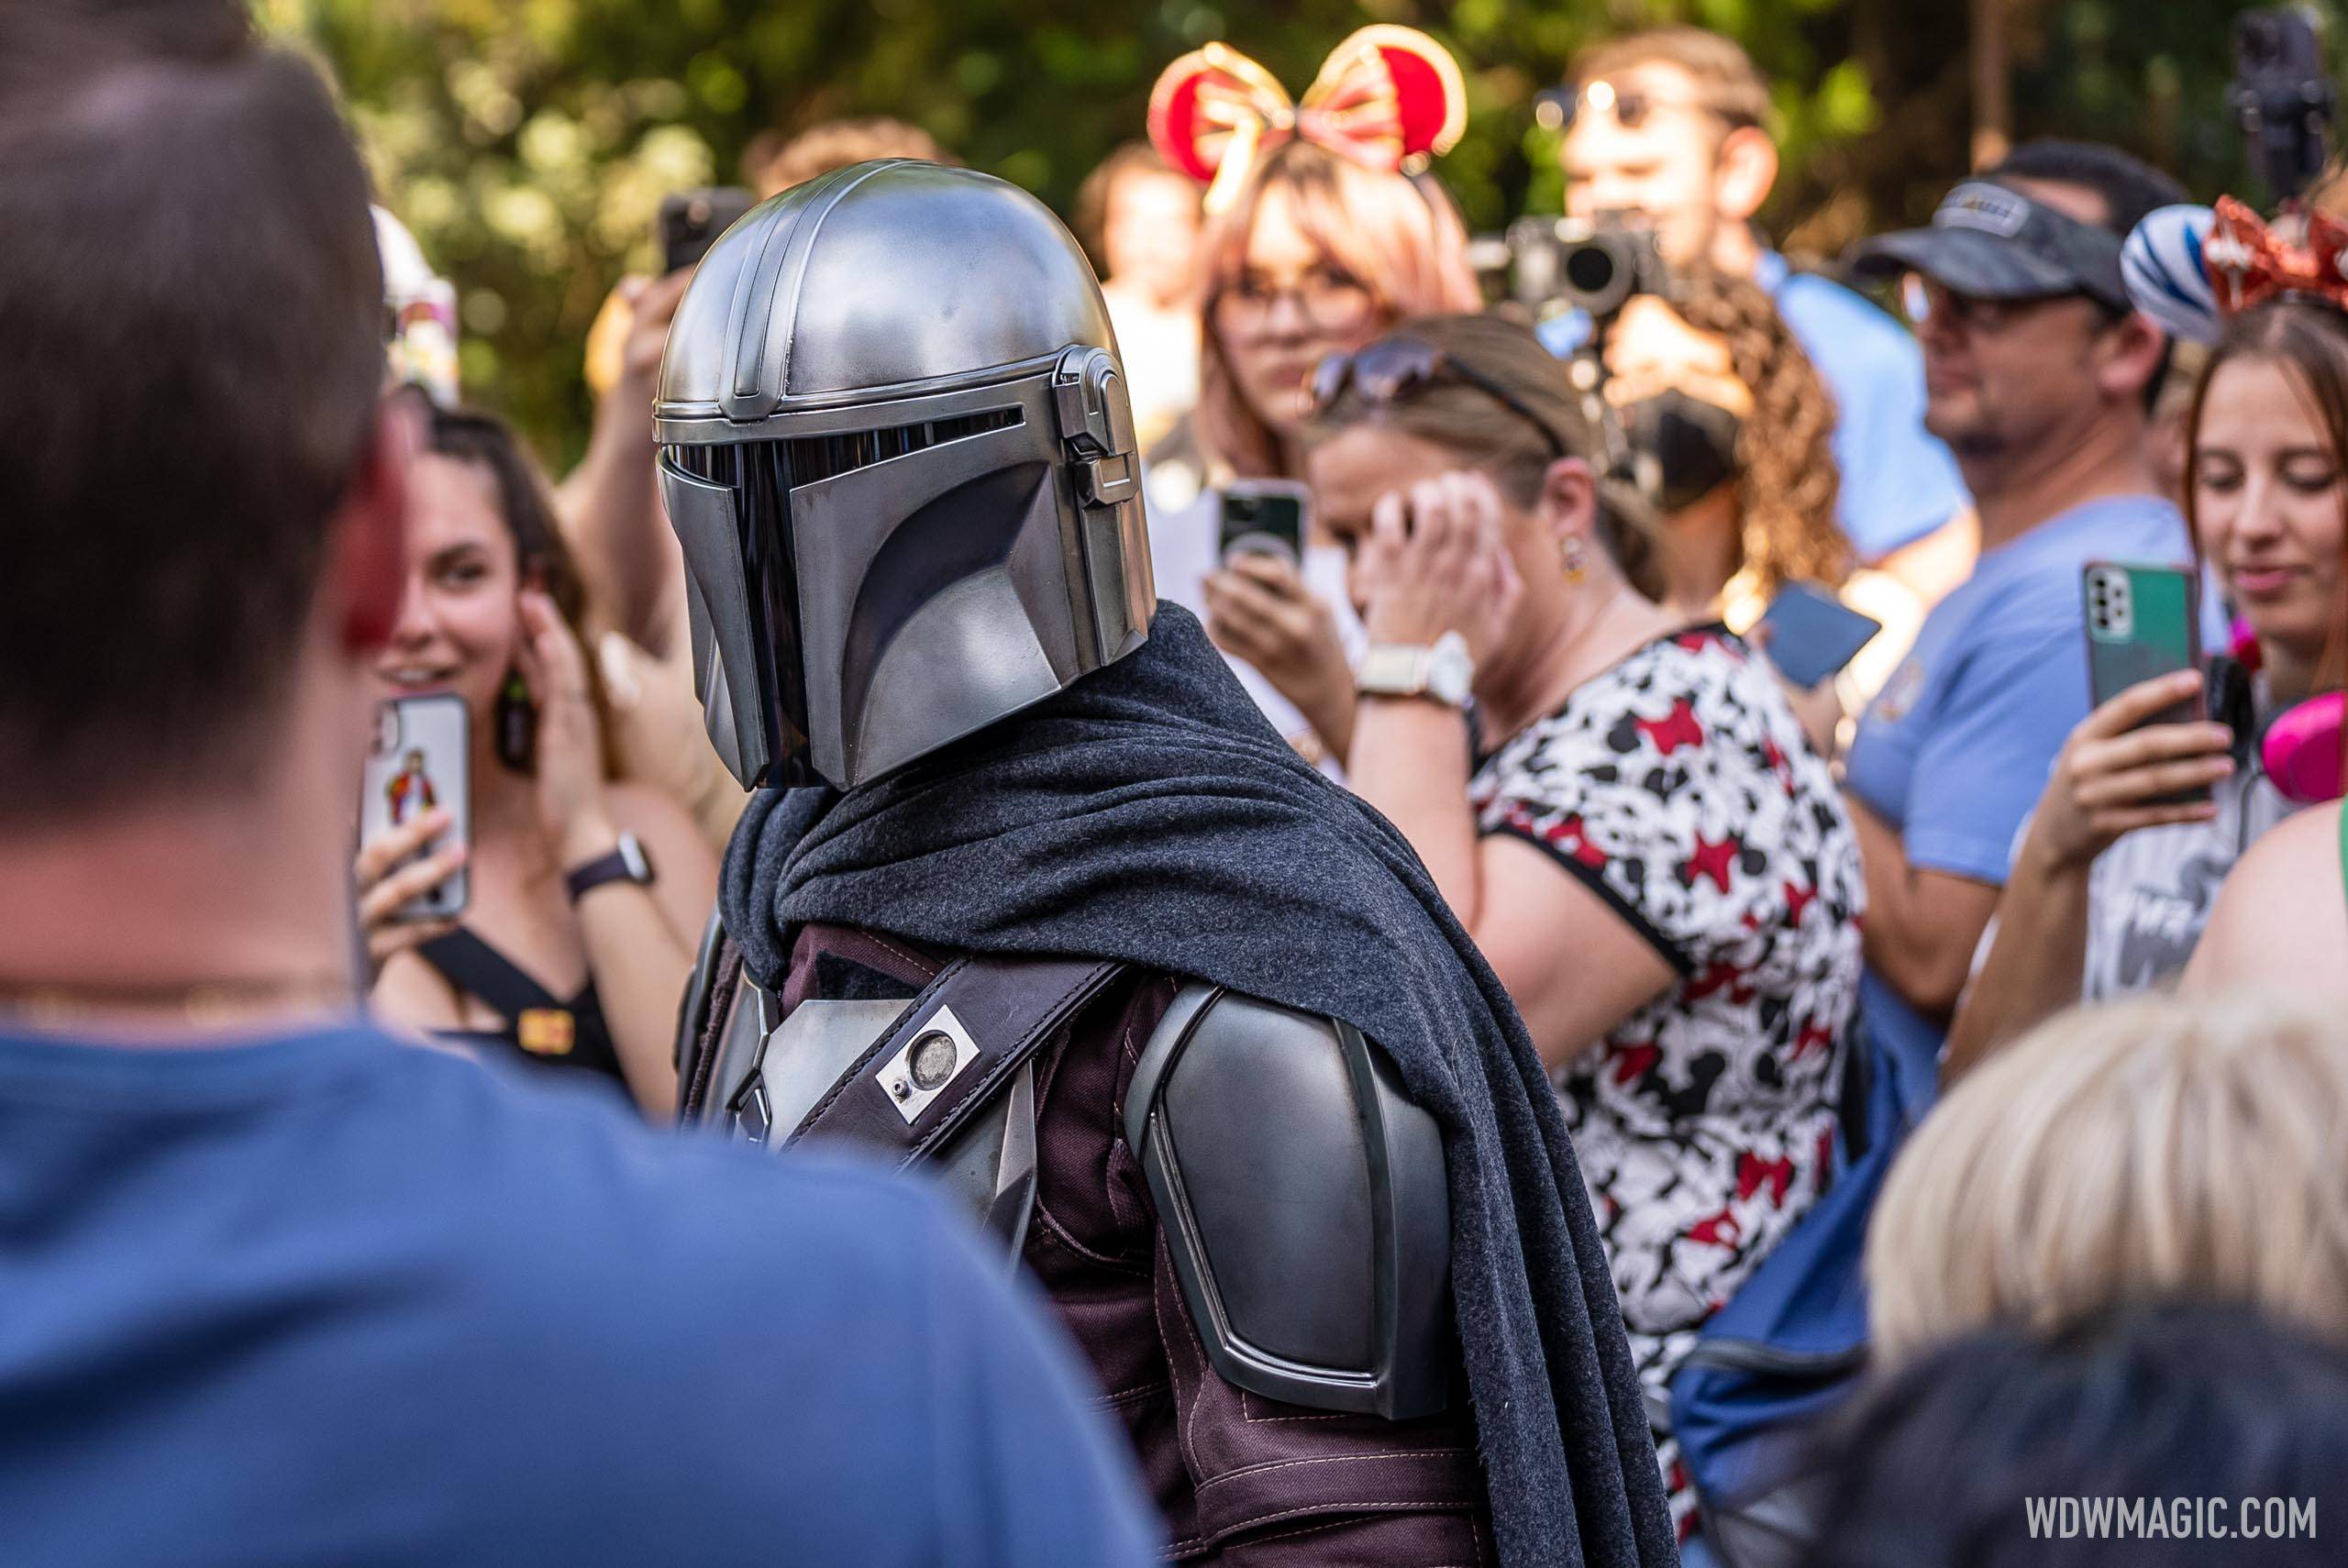 The Mandalorian and Grogu first day at Disney's Hollywood Studios